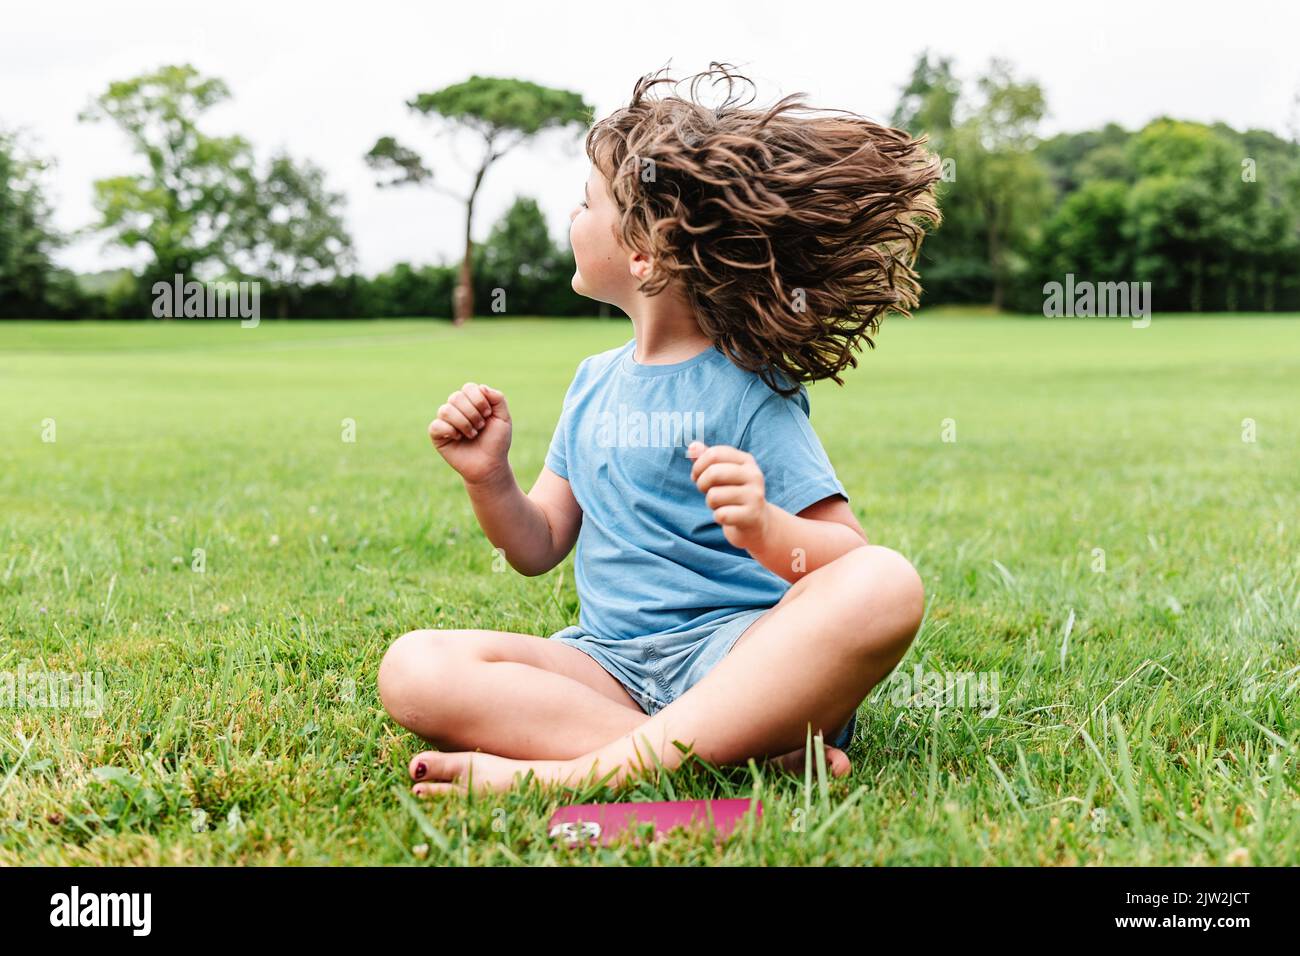 Cheerful barefoot child in casual clothes smiling and shaking hair while sitting cross legged on grassy lawn on summer weekend day in park Stock Photo